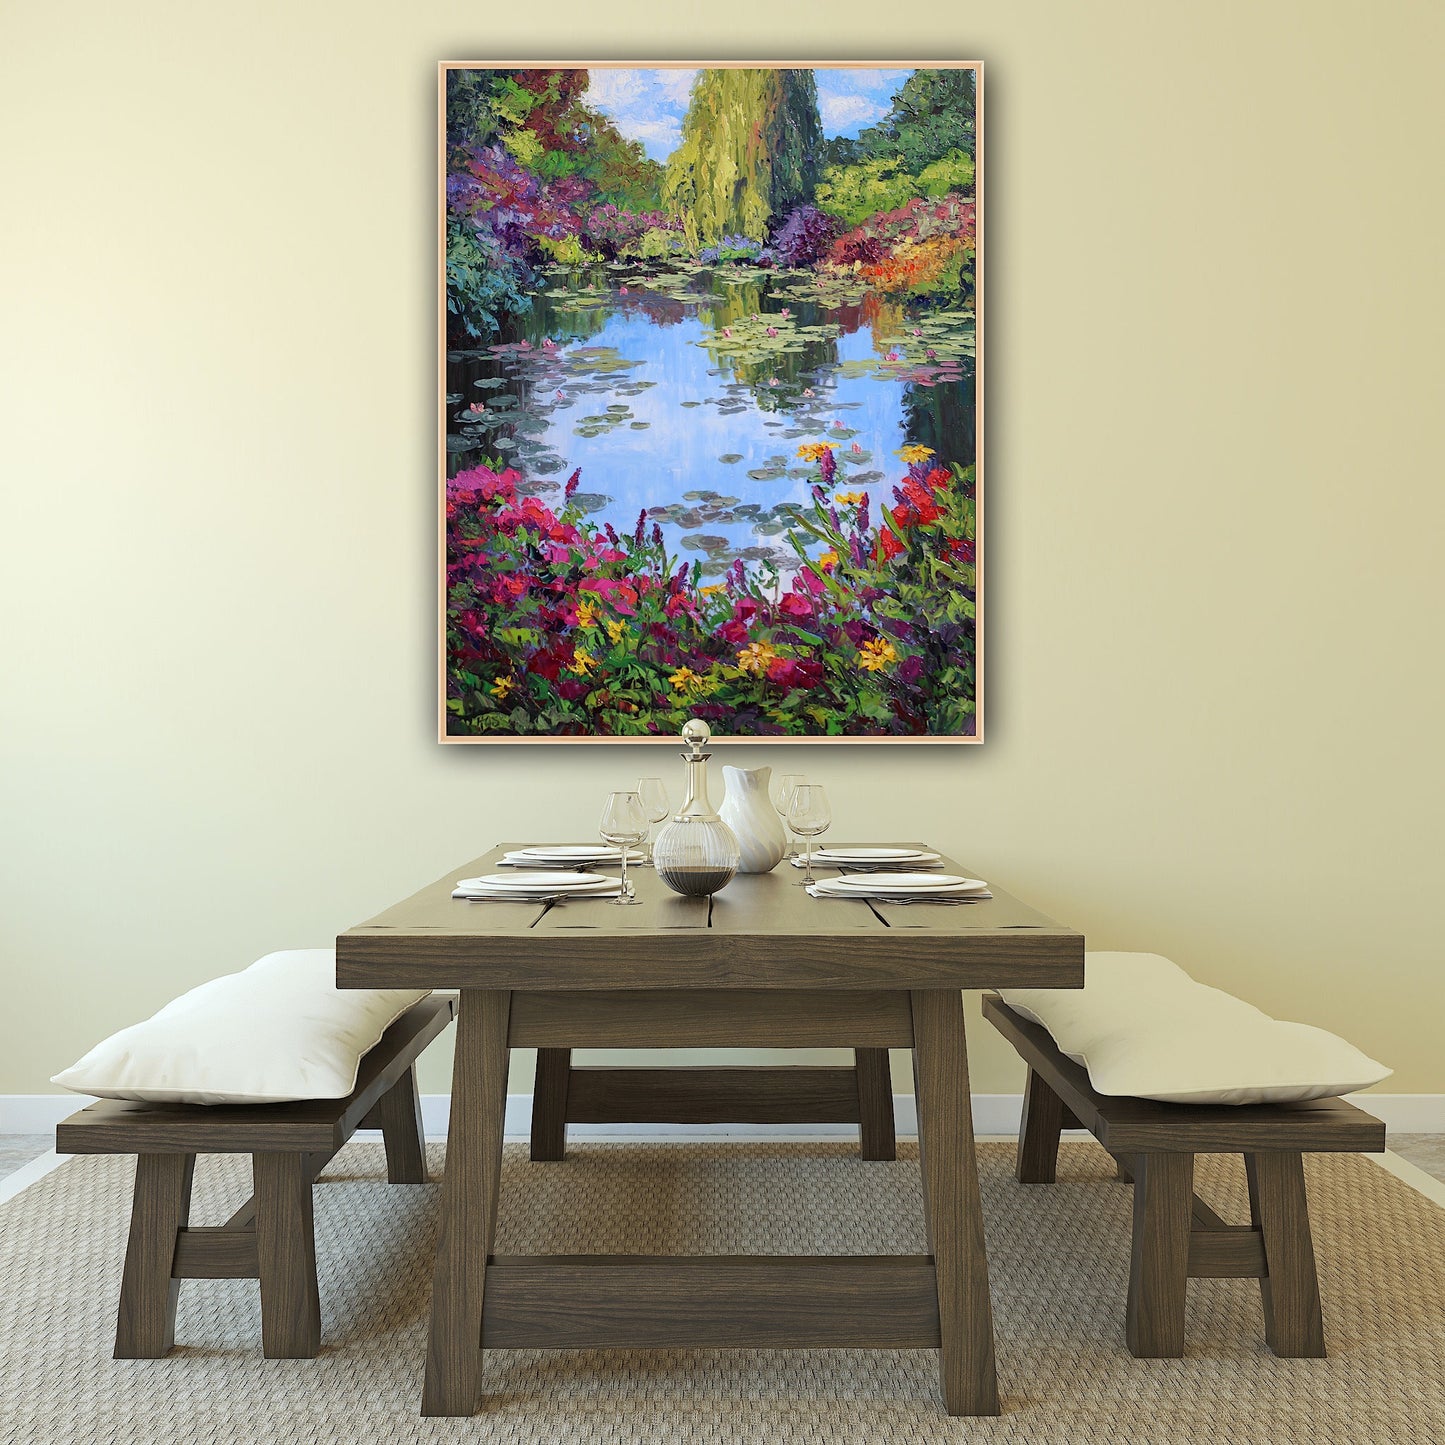 Giverny Gardens, 30" x 24" Garden Landscape Of Monet's Waterlily Pond, Oil On Canvas